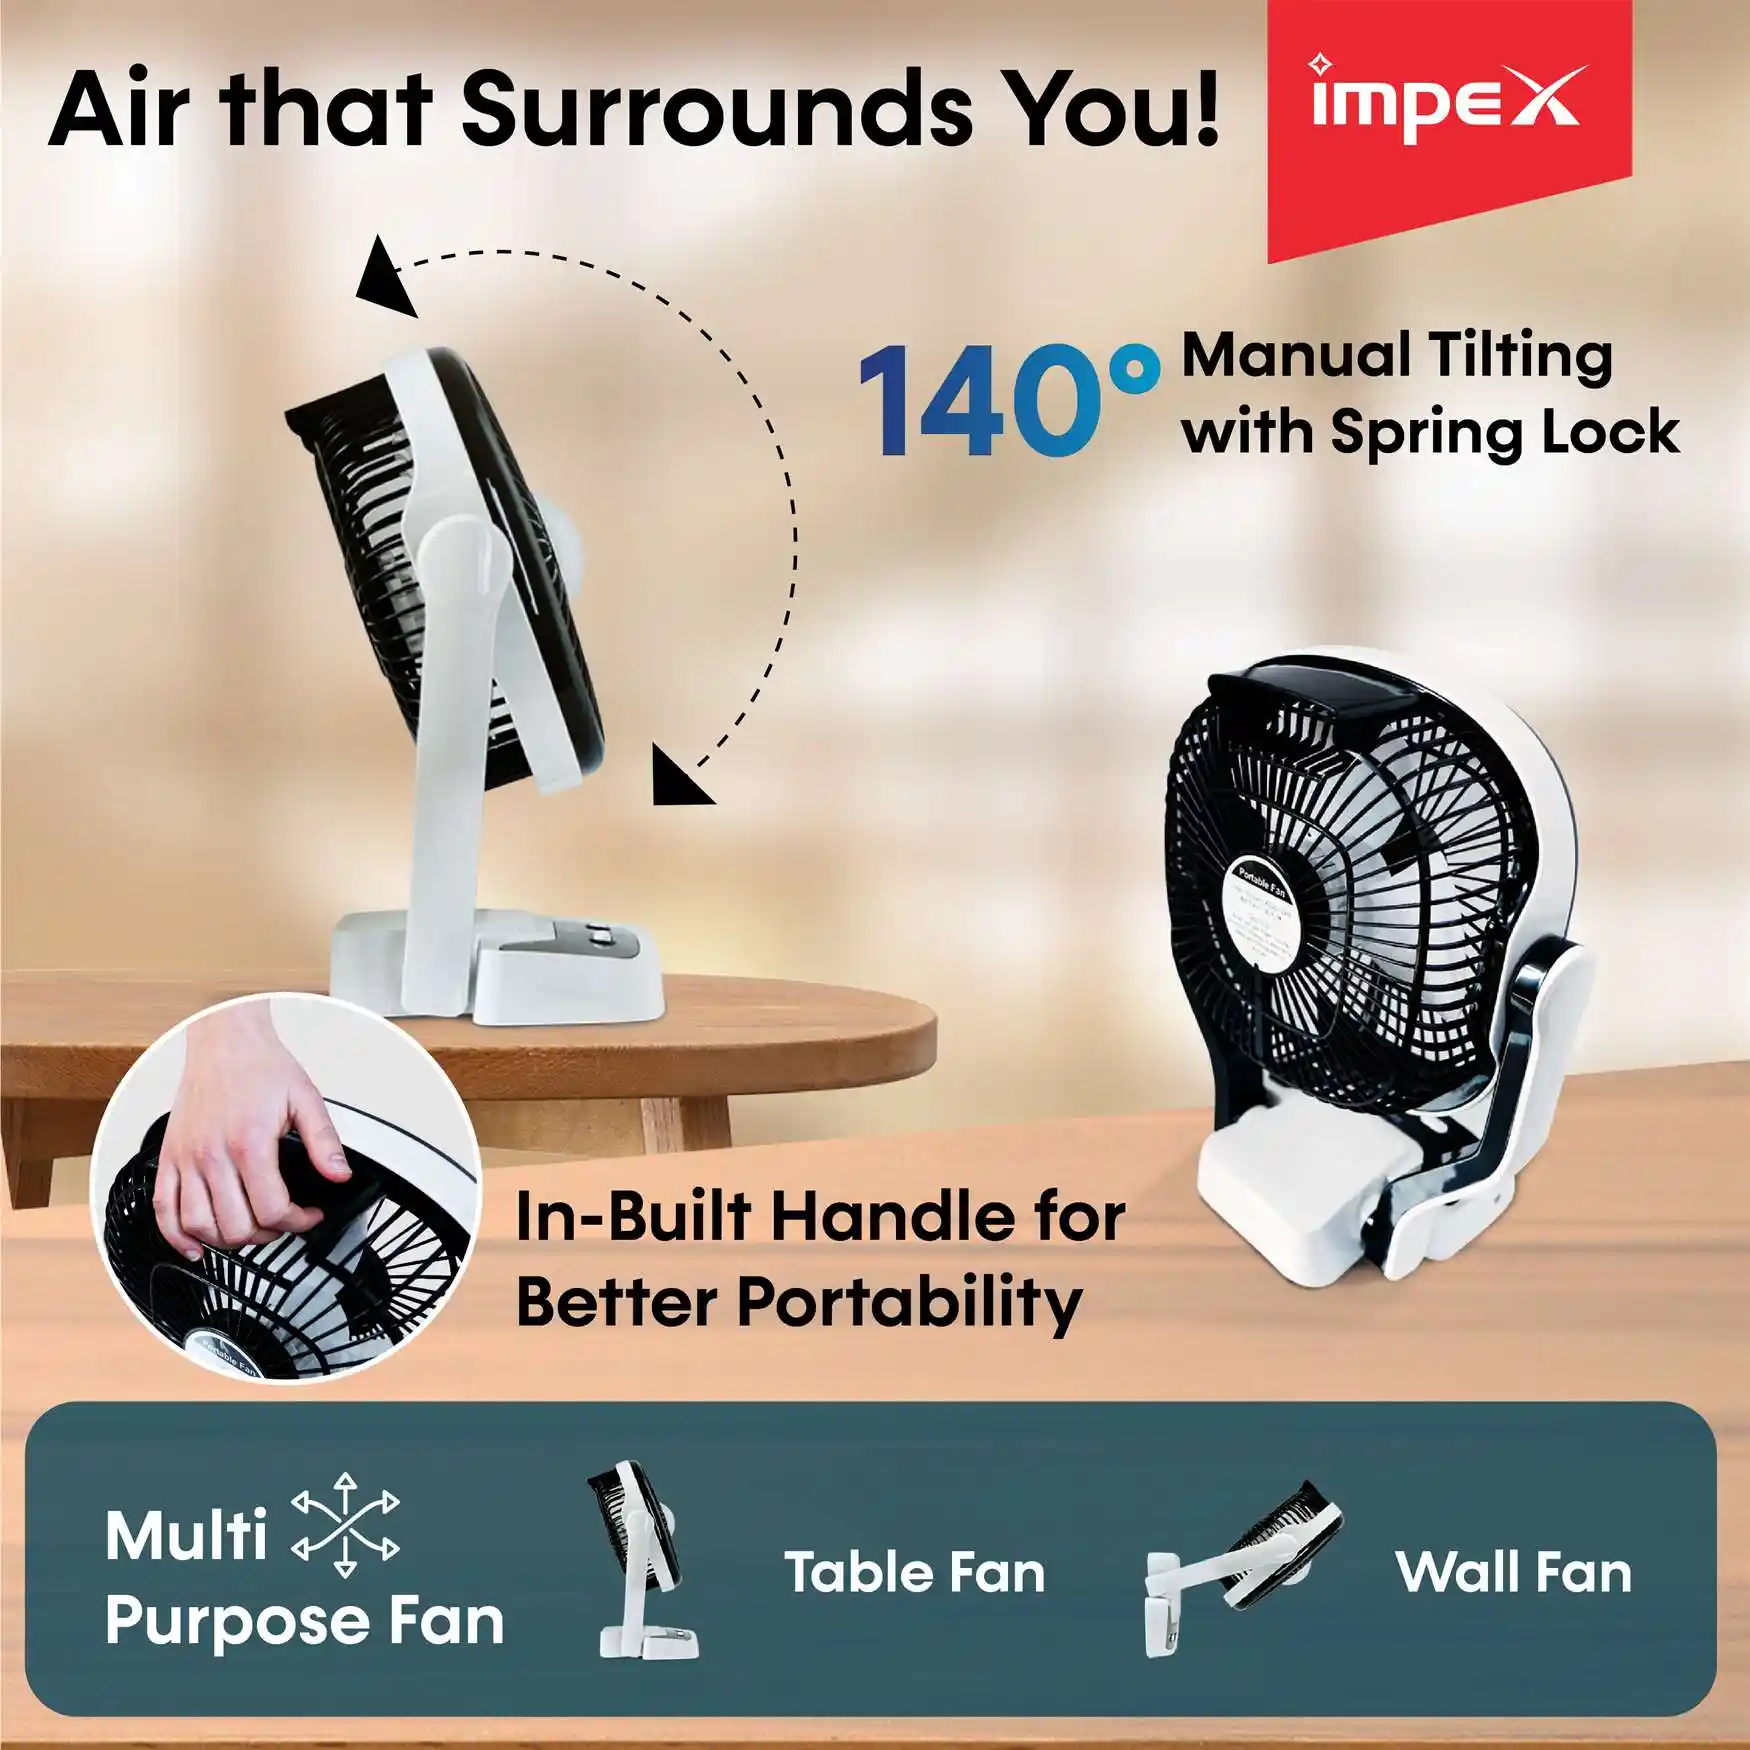 Rechargeable Table Fan with LED Light | Breeze D1